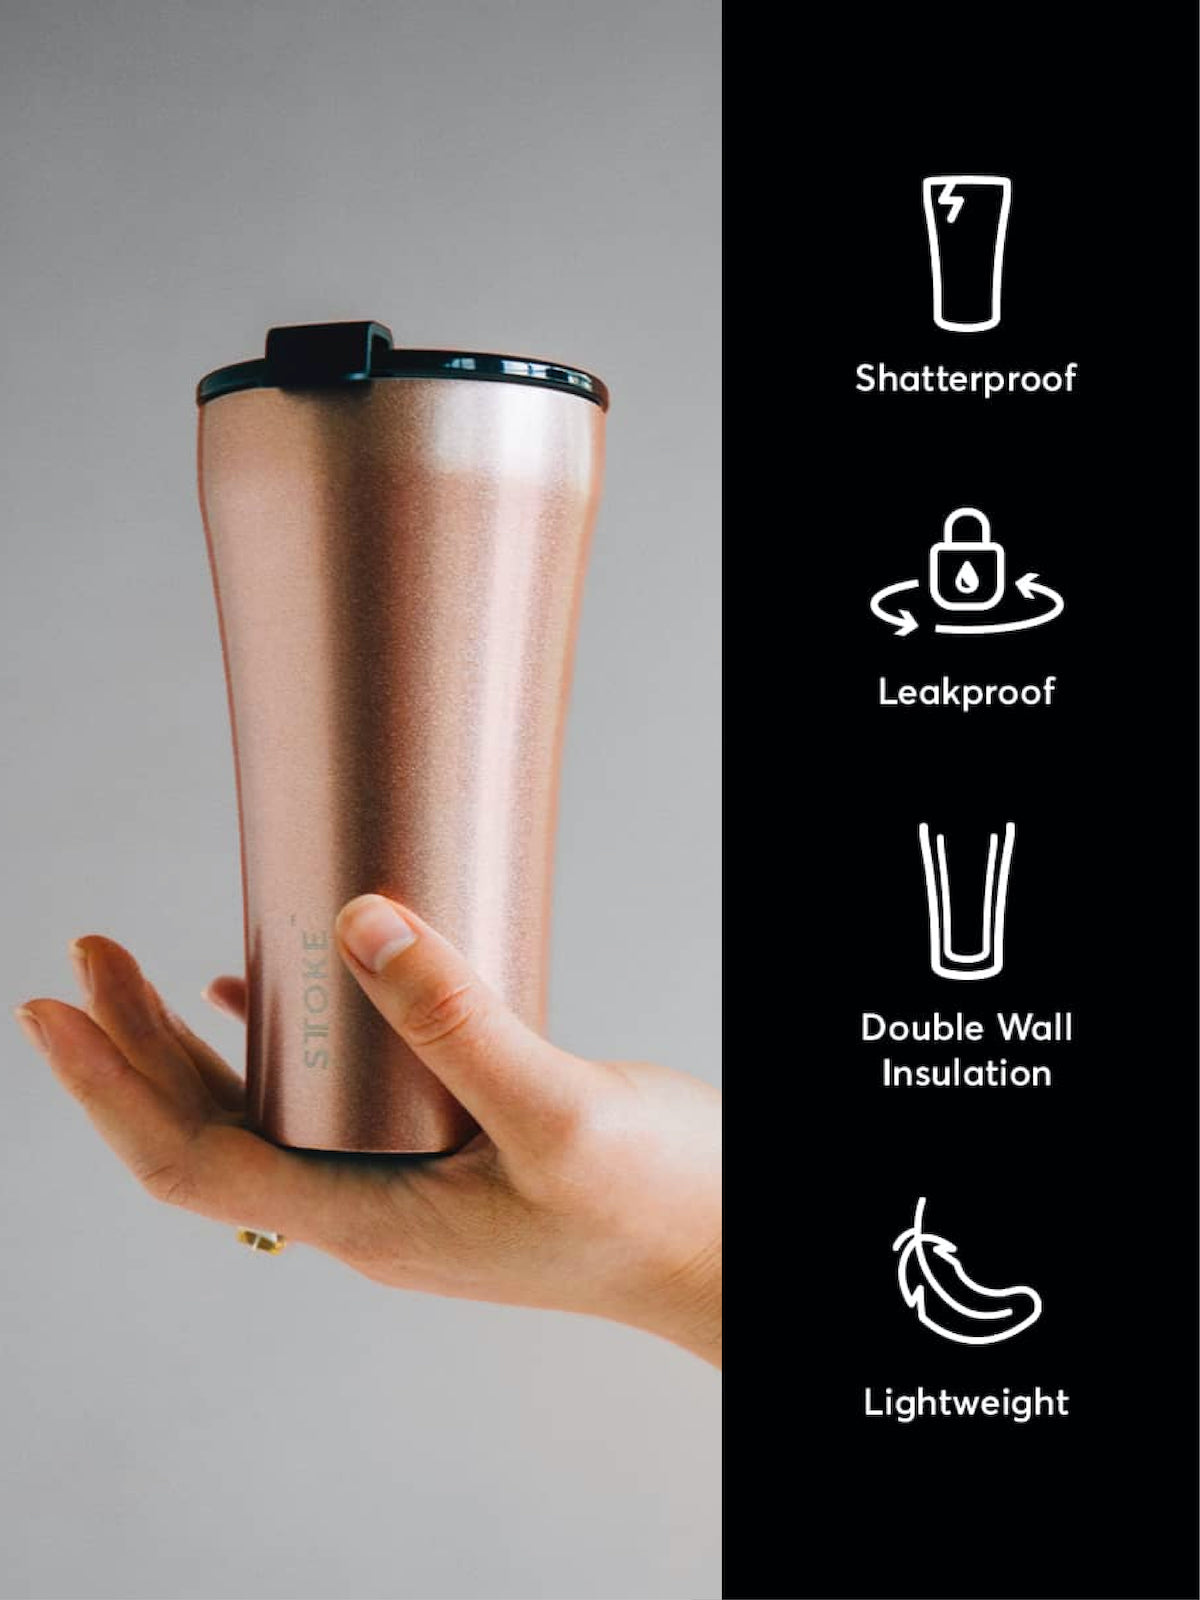 Sttoke Leakproof Insulated Ceramic Cup 12oz